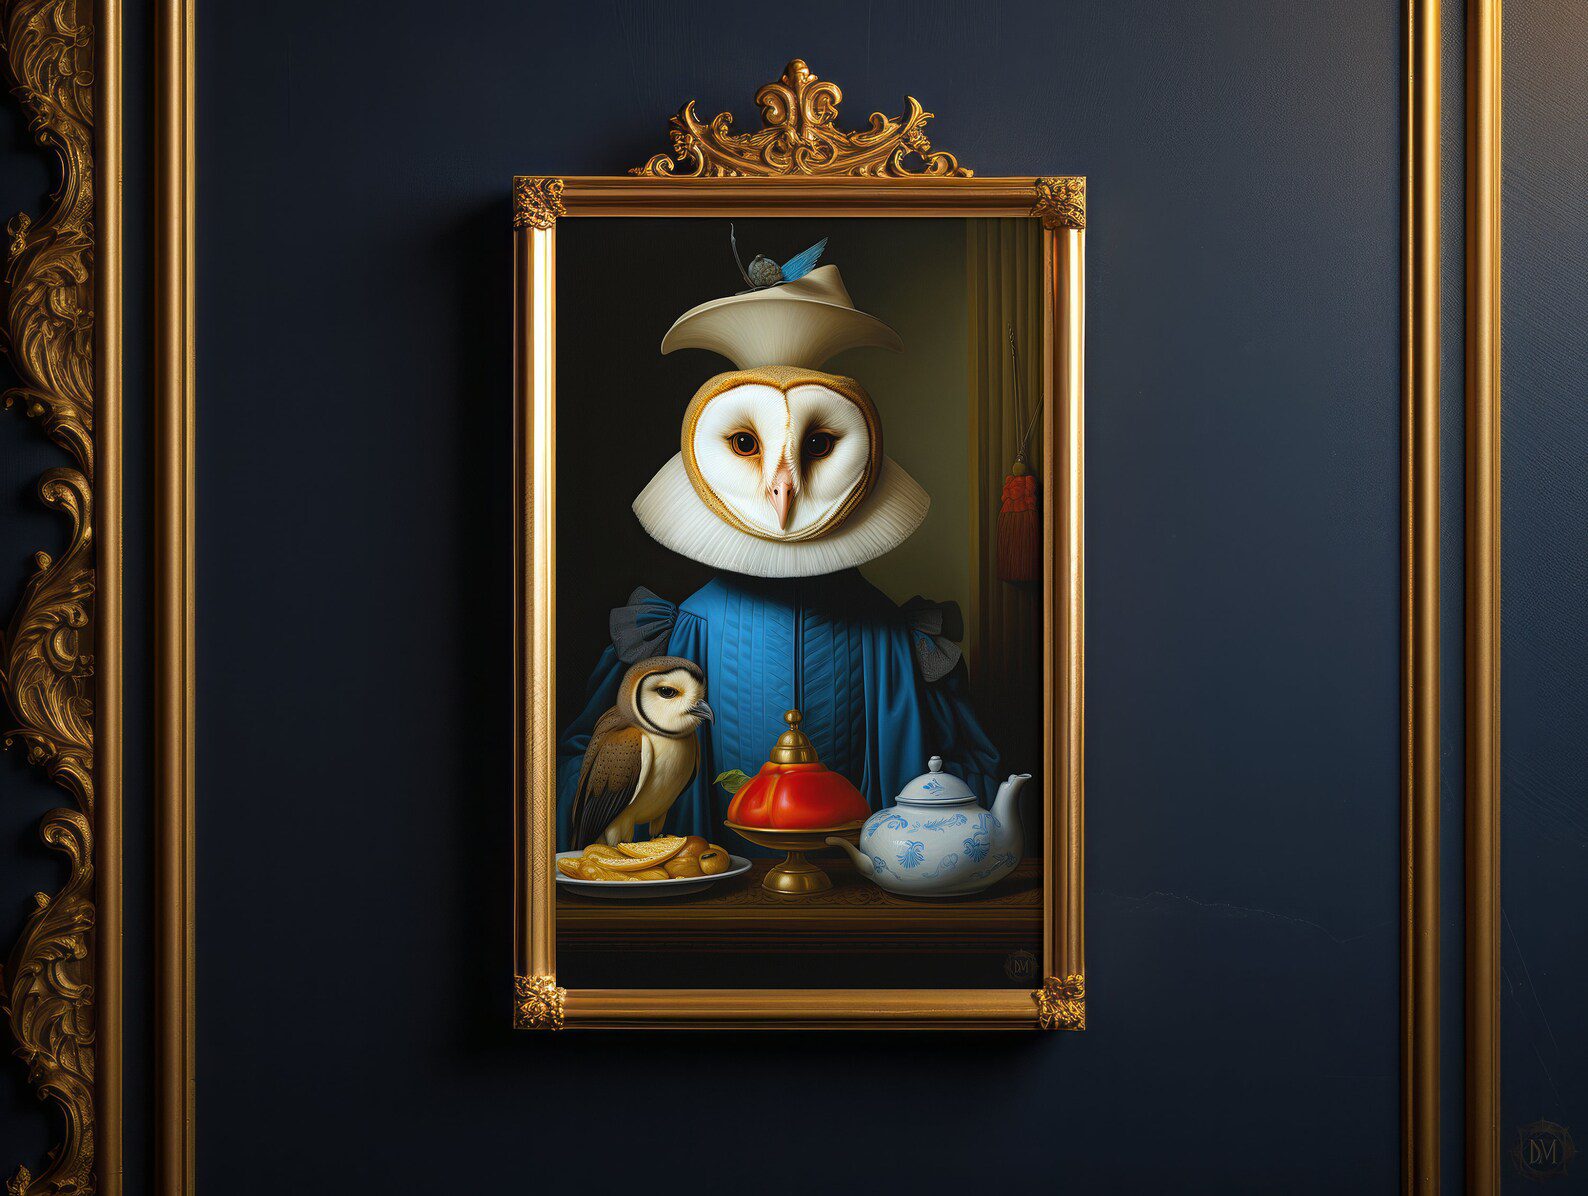 Dark Academia Prints Owl Painting of Printable Animal Art Print. The White Owl Wears Renaissance Fashion Outfit. Painting in the style of Johannes Vermeer Flemish Still life Dutch folk paintings.